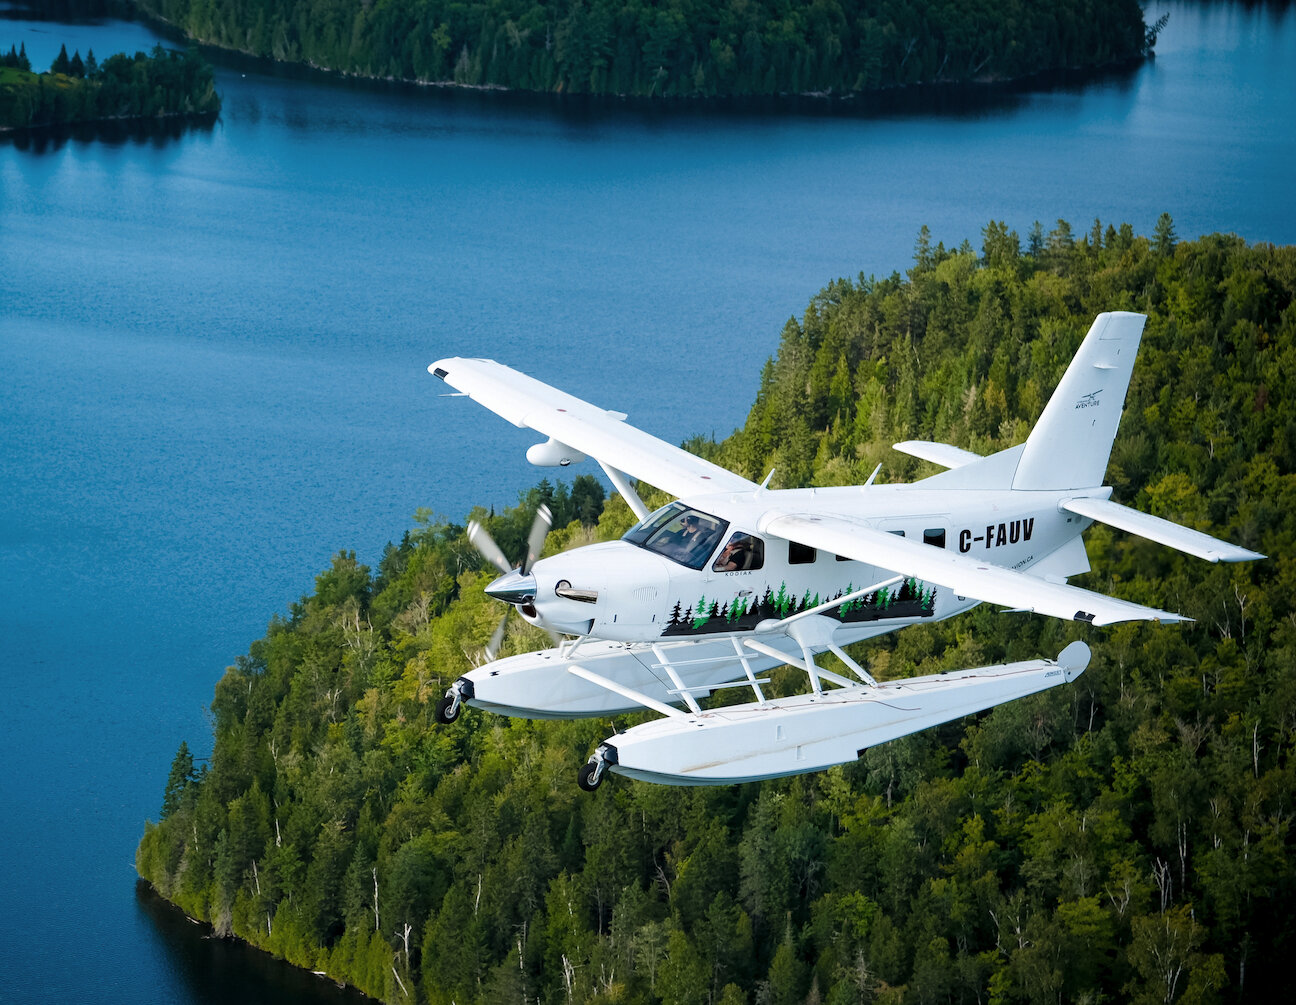 A seaplane flying over a lake